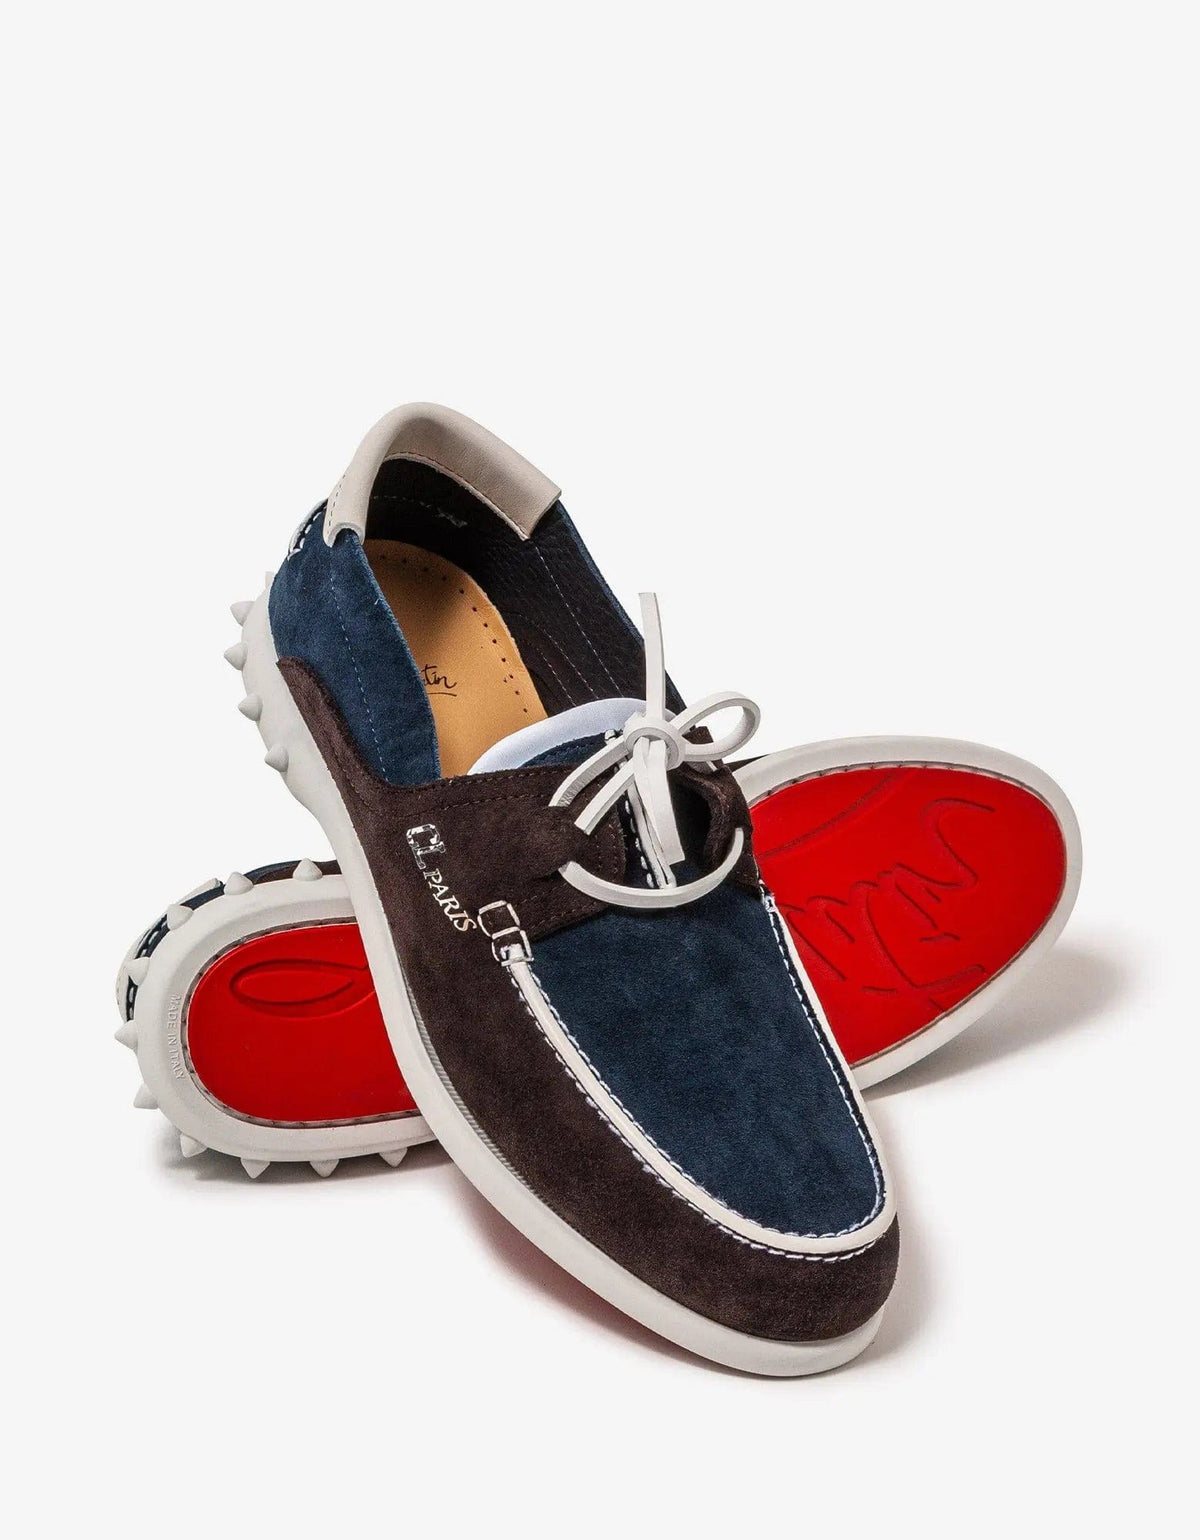 Christian Louboutin Geromoc Navy & Brown Suede Leather Loafers